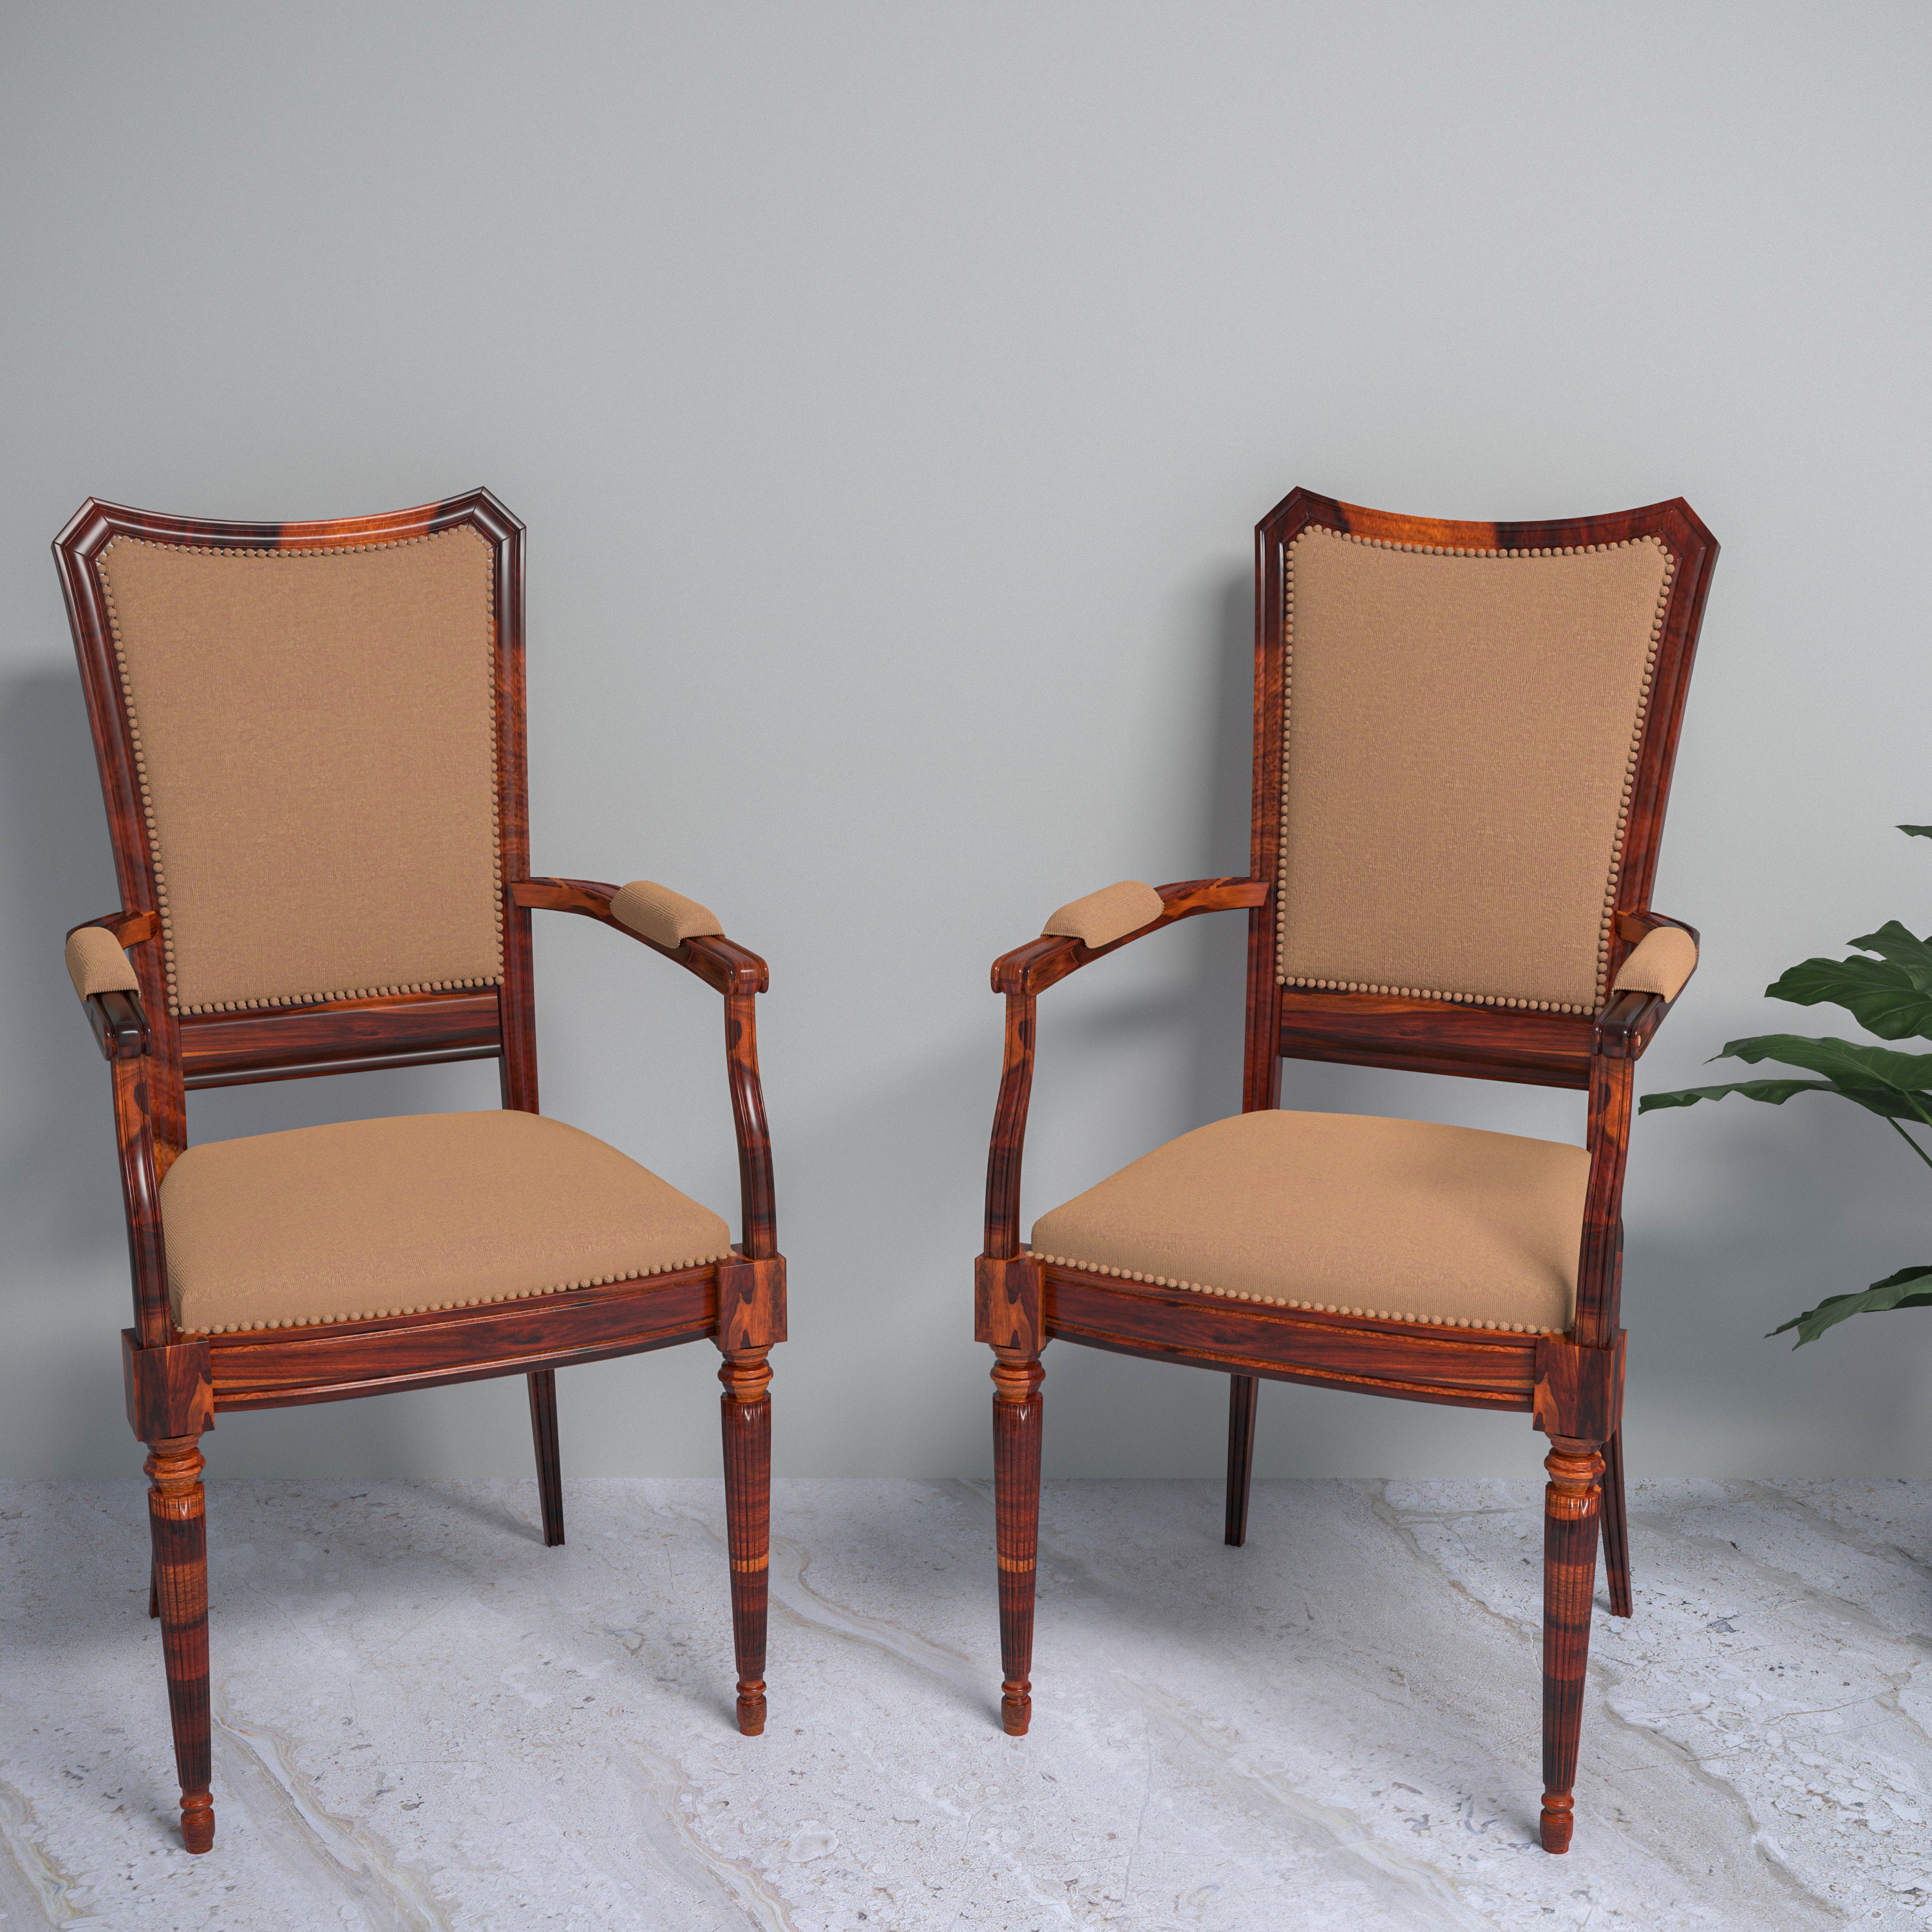 Classic Orient Style Wooden Vintage Handmade Chair Set of 2 Arm Chair